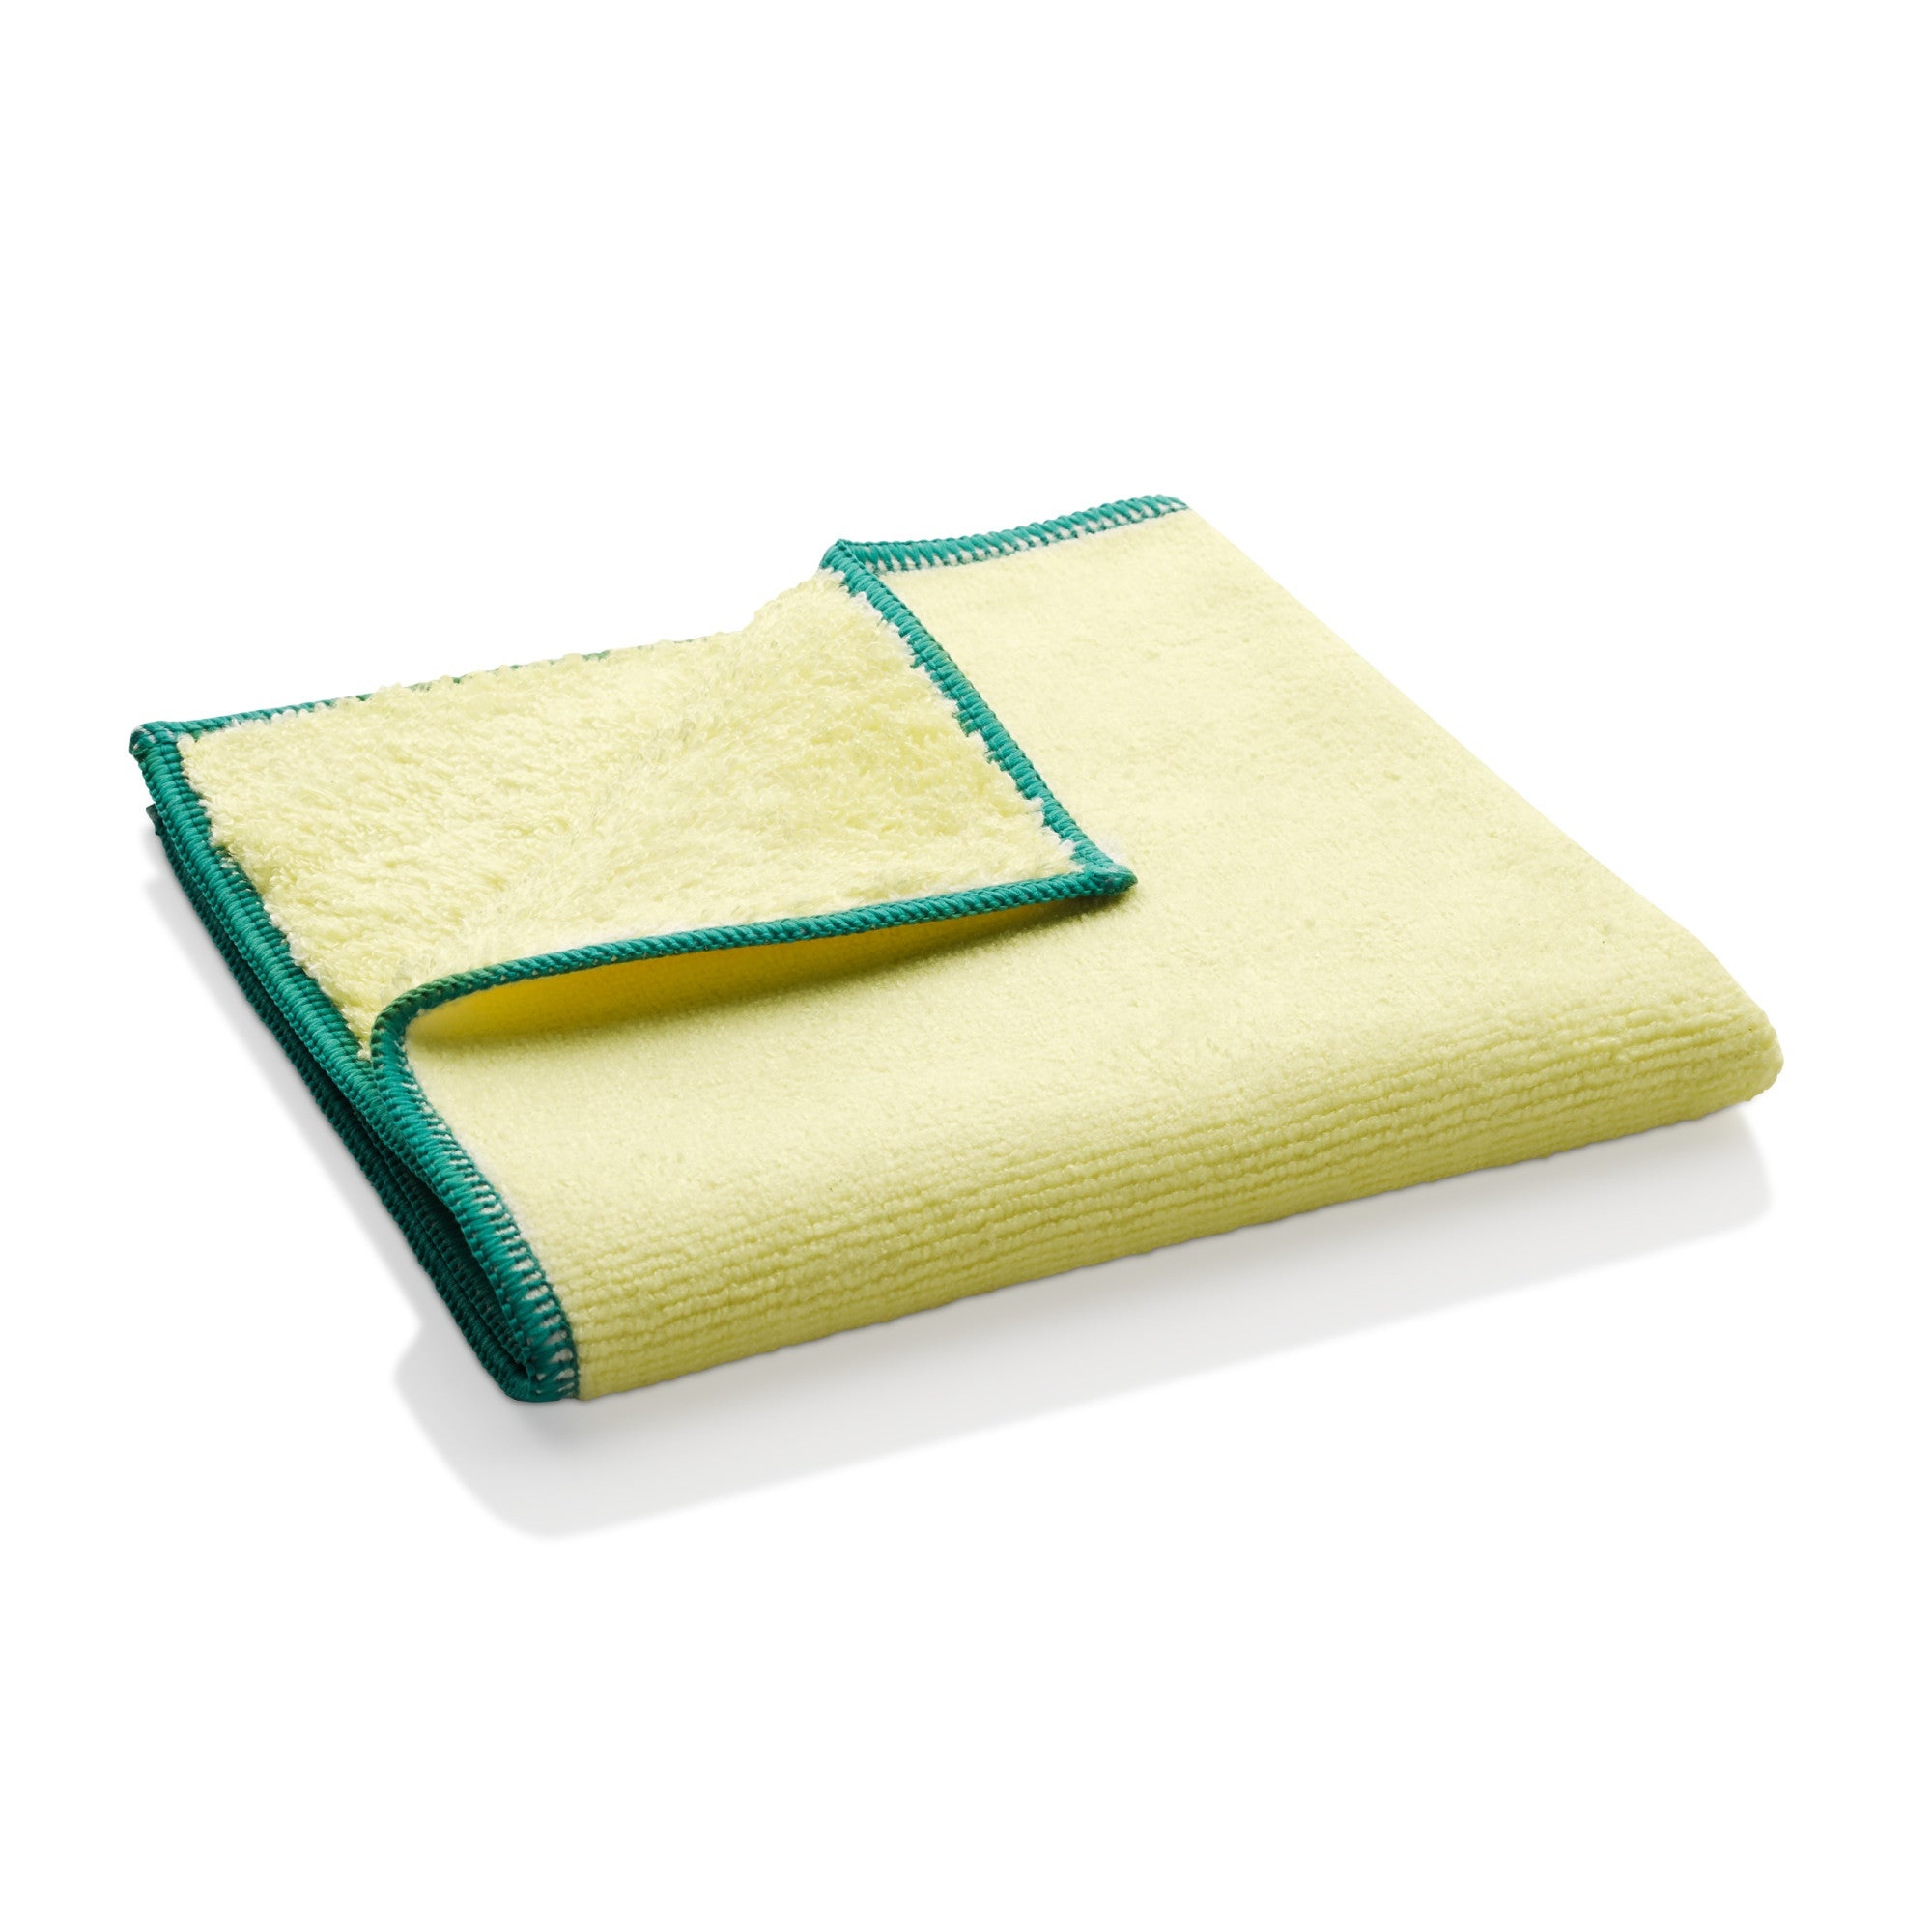 High Performance Dusting/Cleaning Cloth